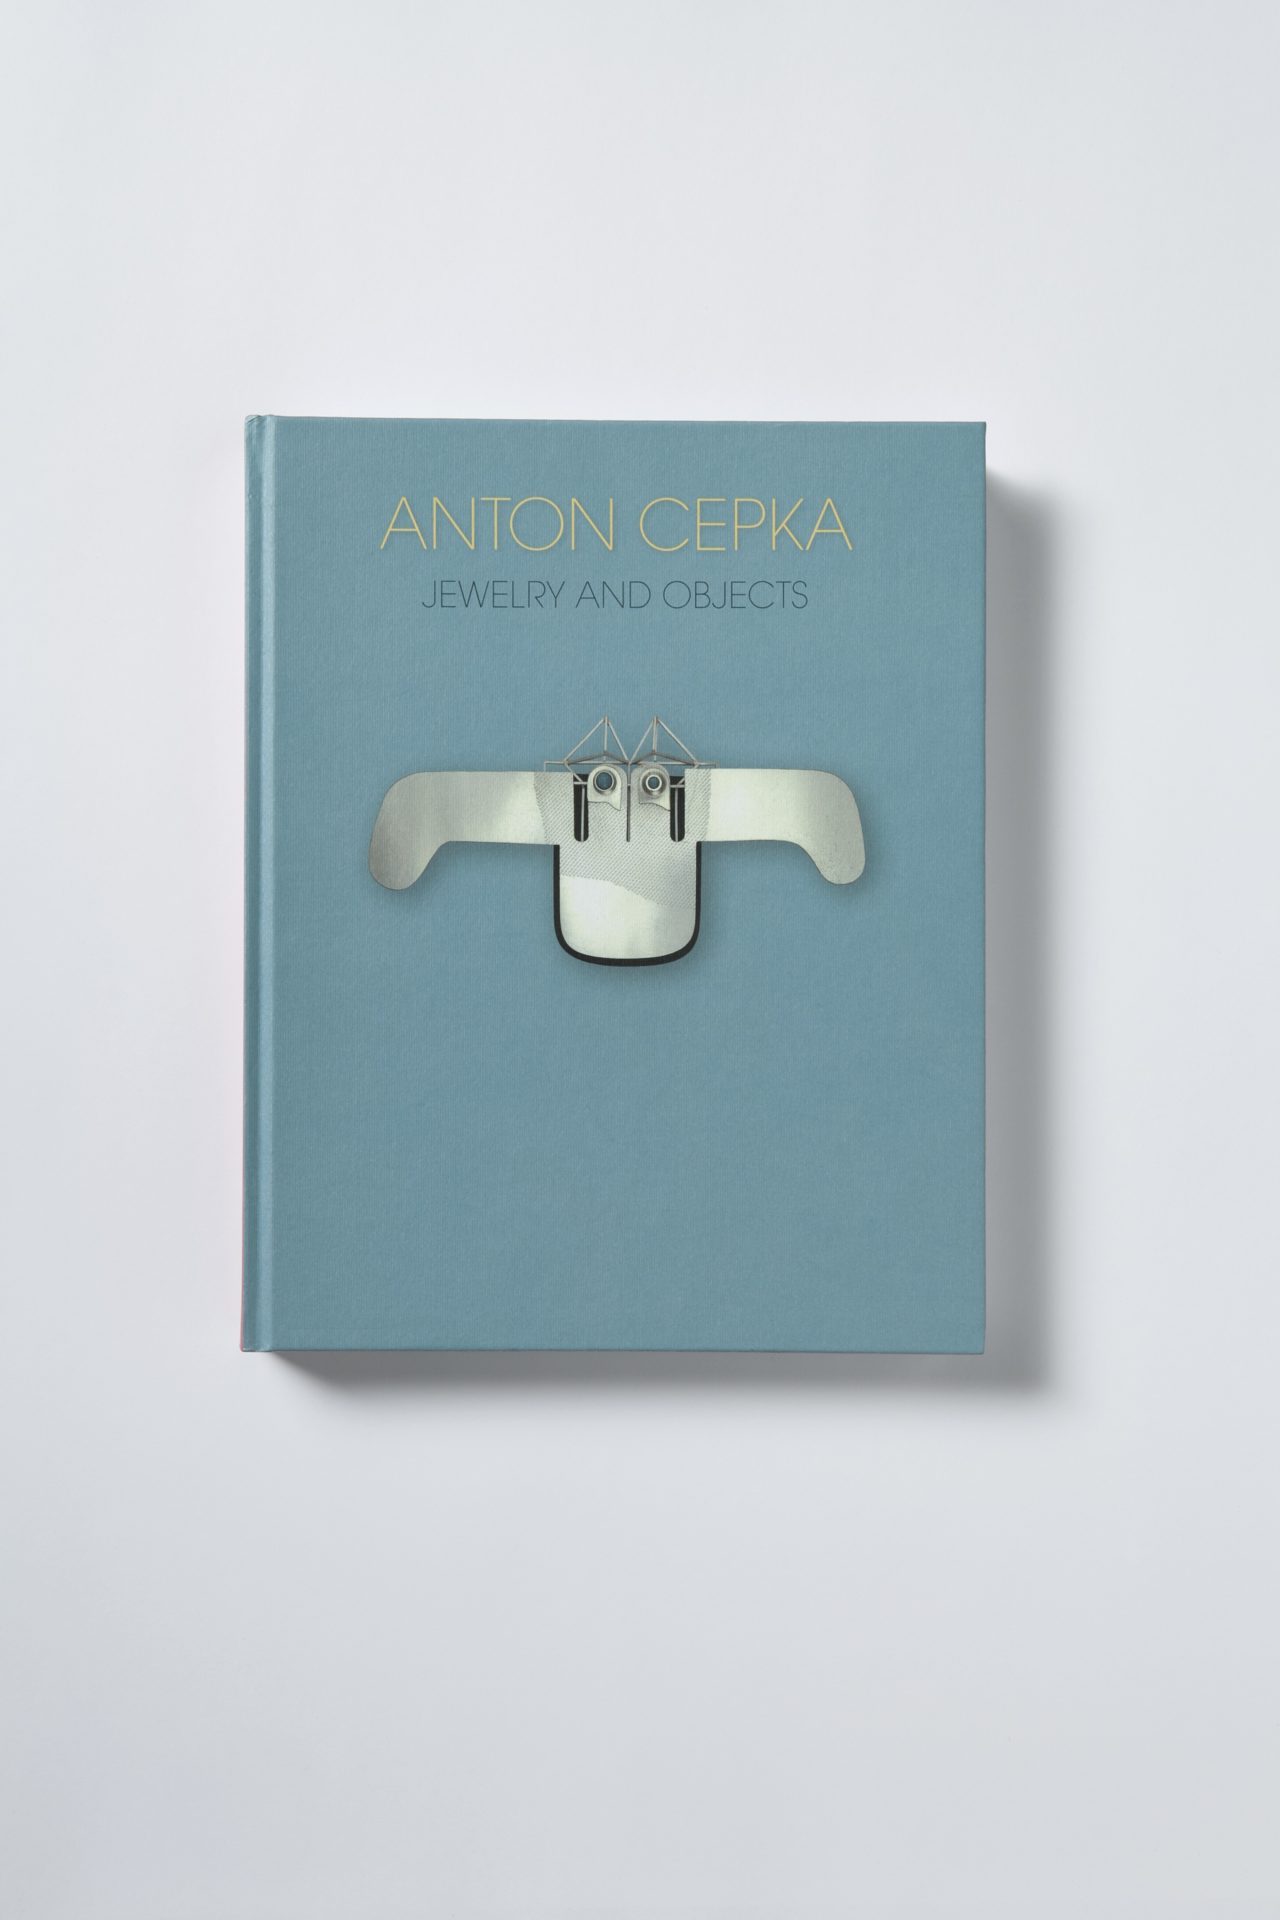 Inscription in yellow Anton Cepka on a sky blue background at the top, below in dark blue Jewelry and Objects. In the centre of the cover a brooch, predominantly silver-coloured, resembling a flying beetle seen from above.